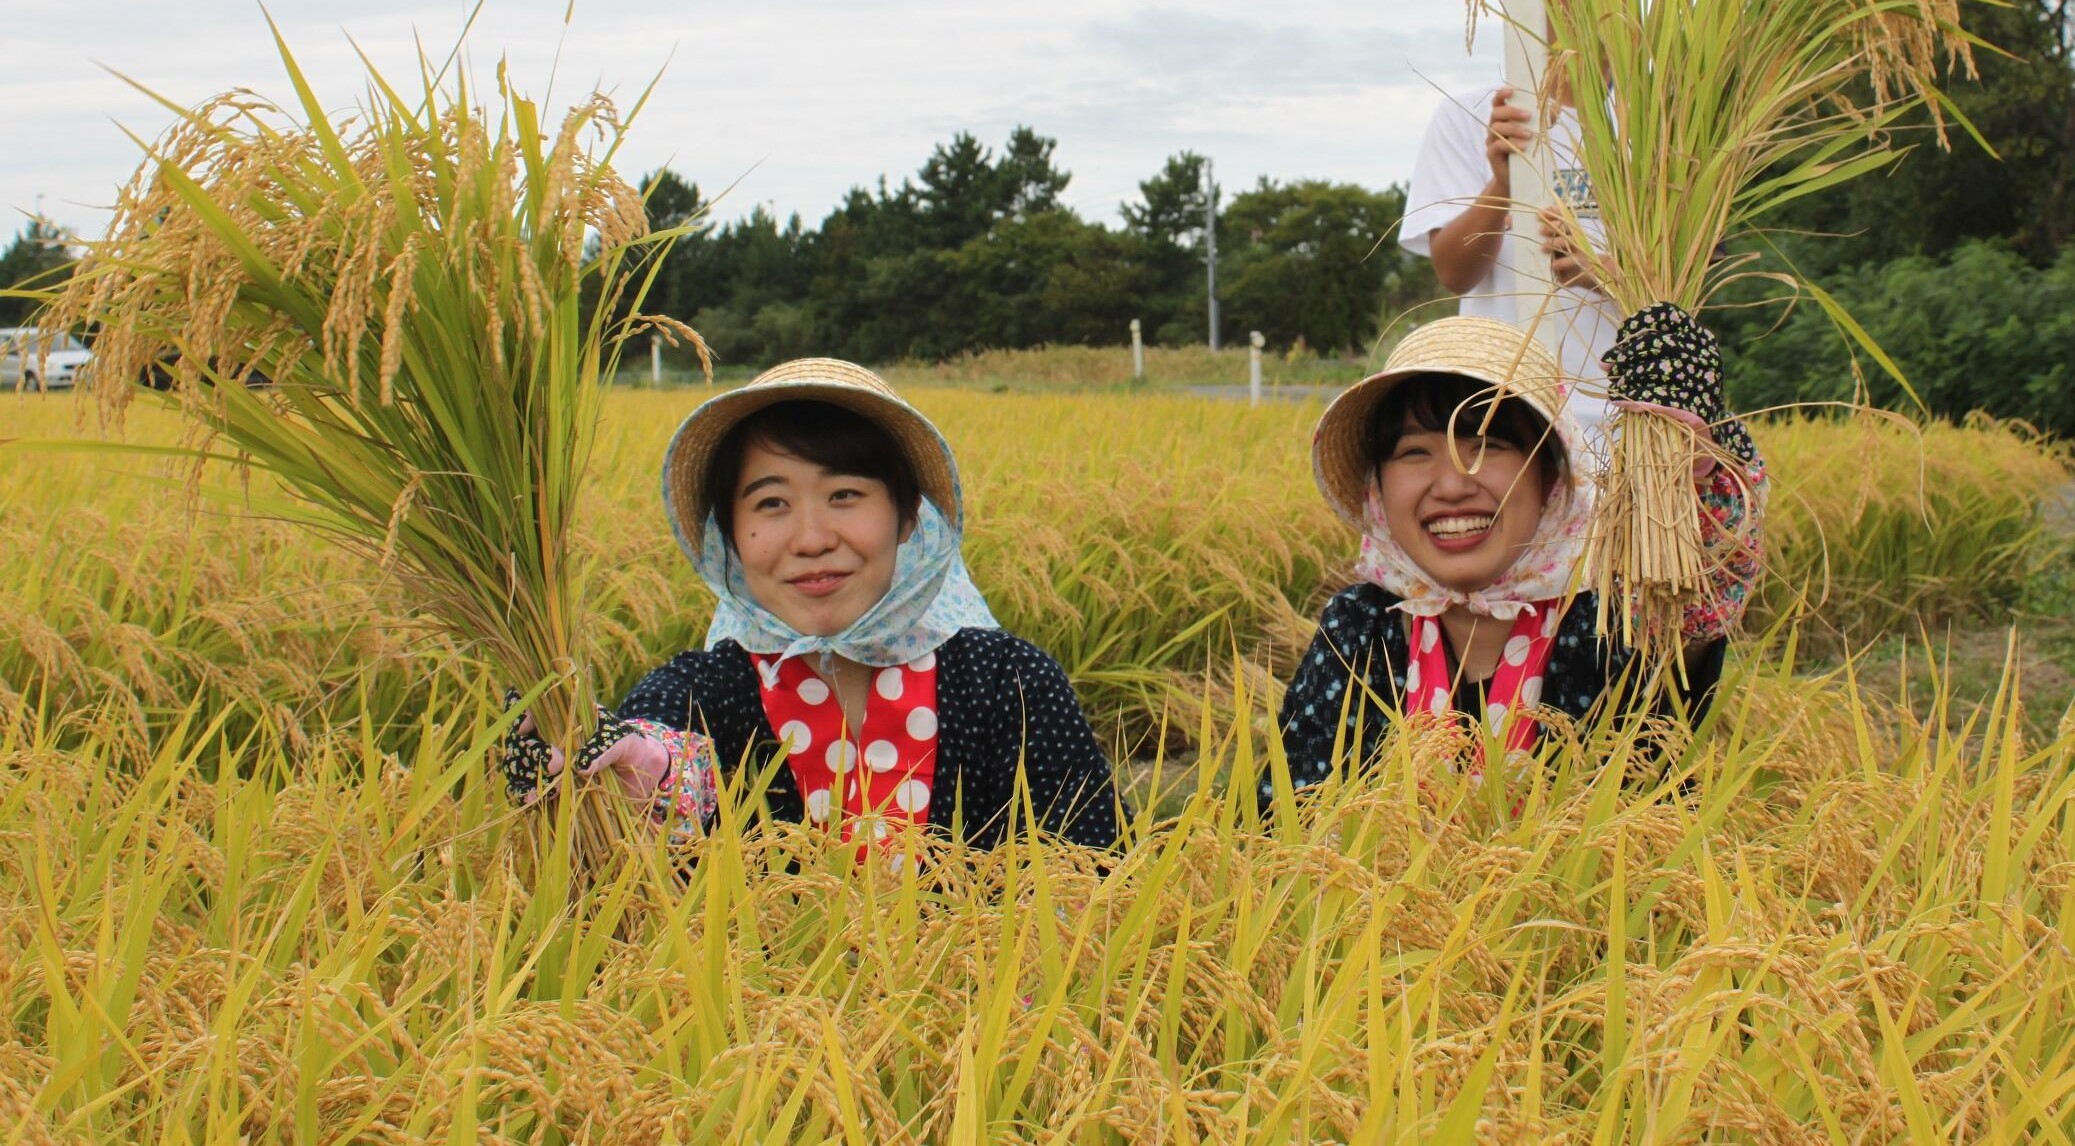 September in major parts of Japan is the month of the rice harvest